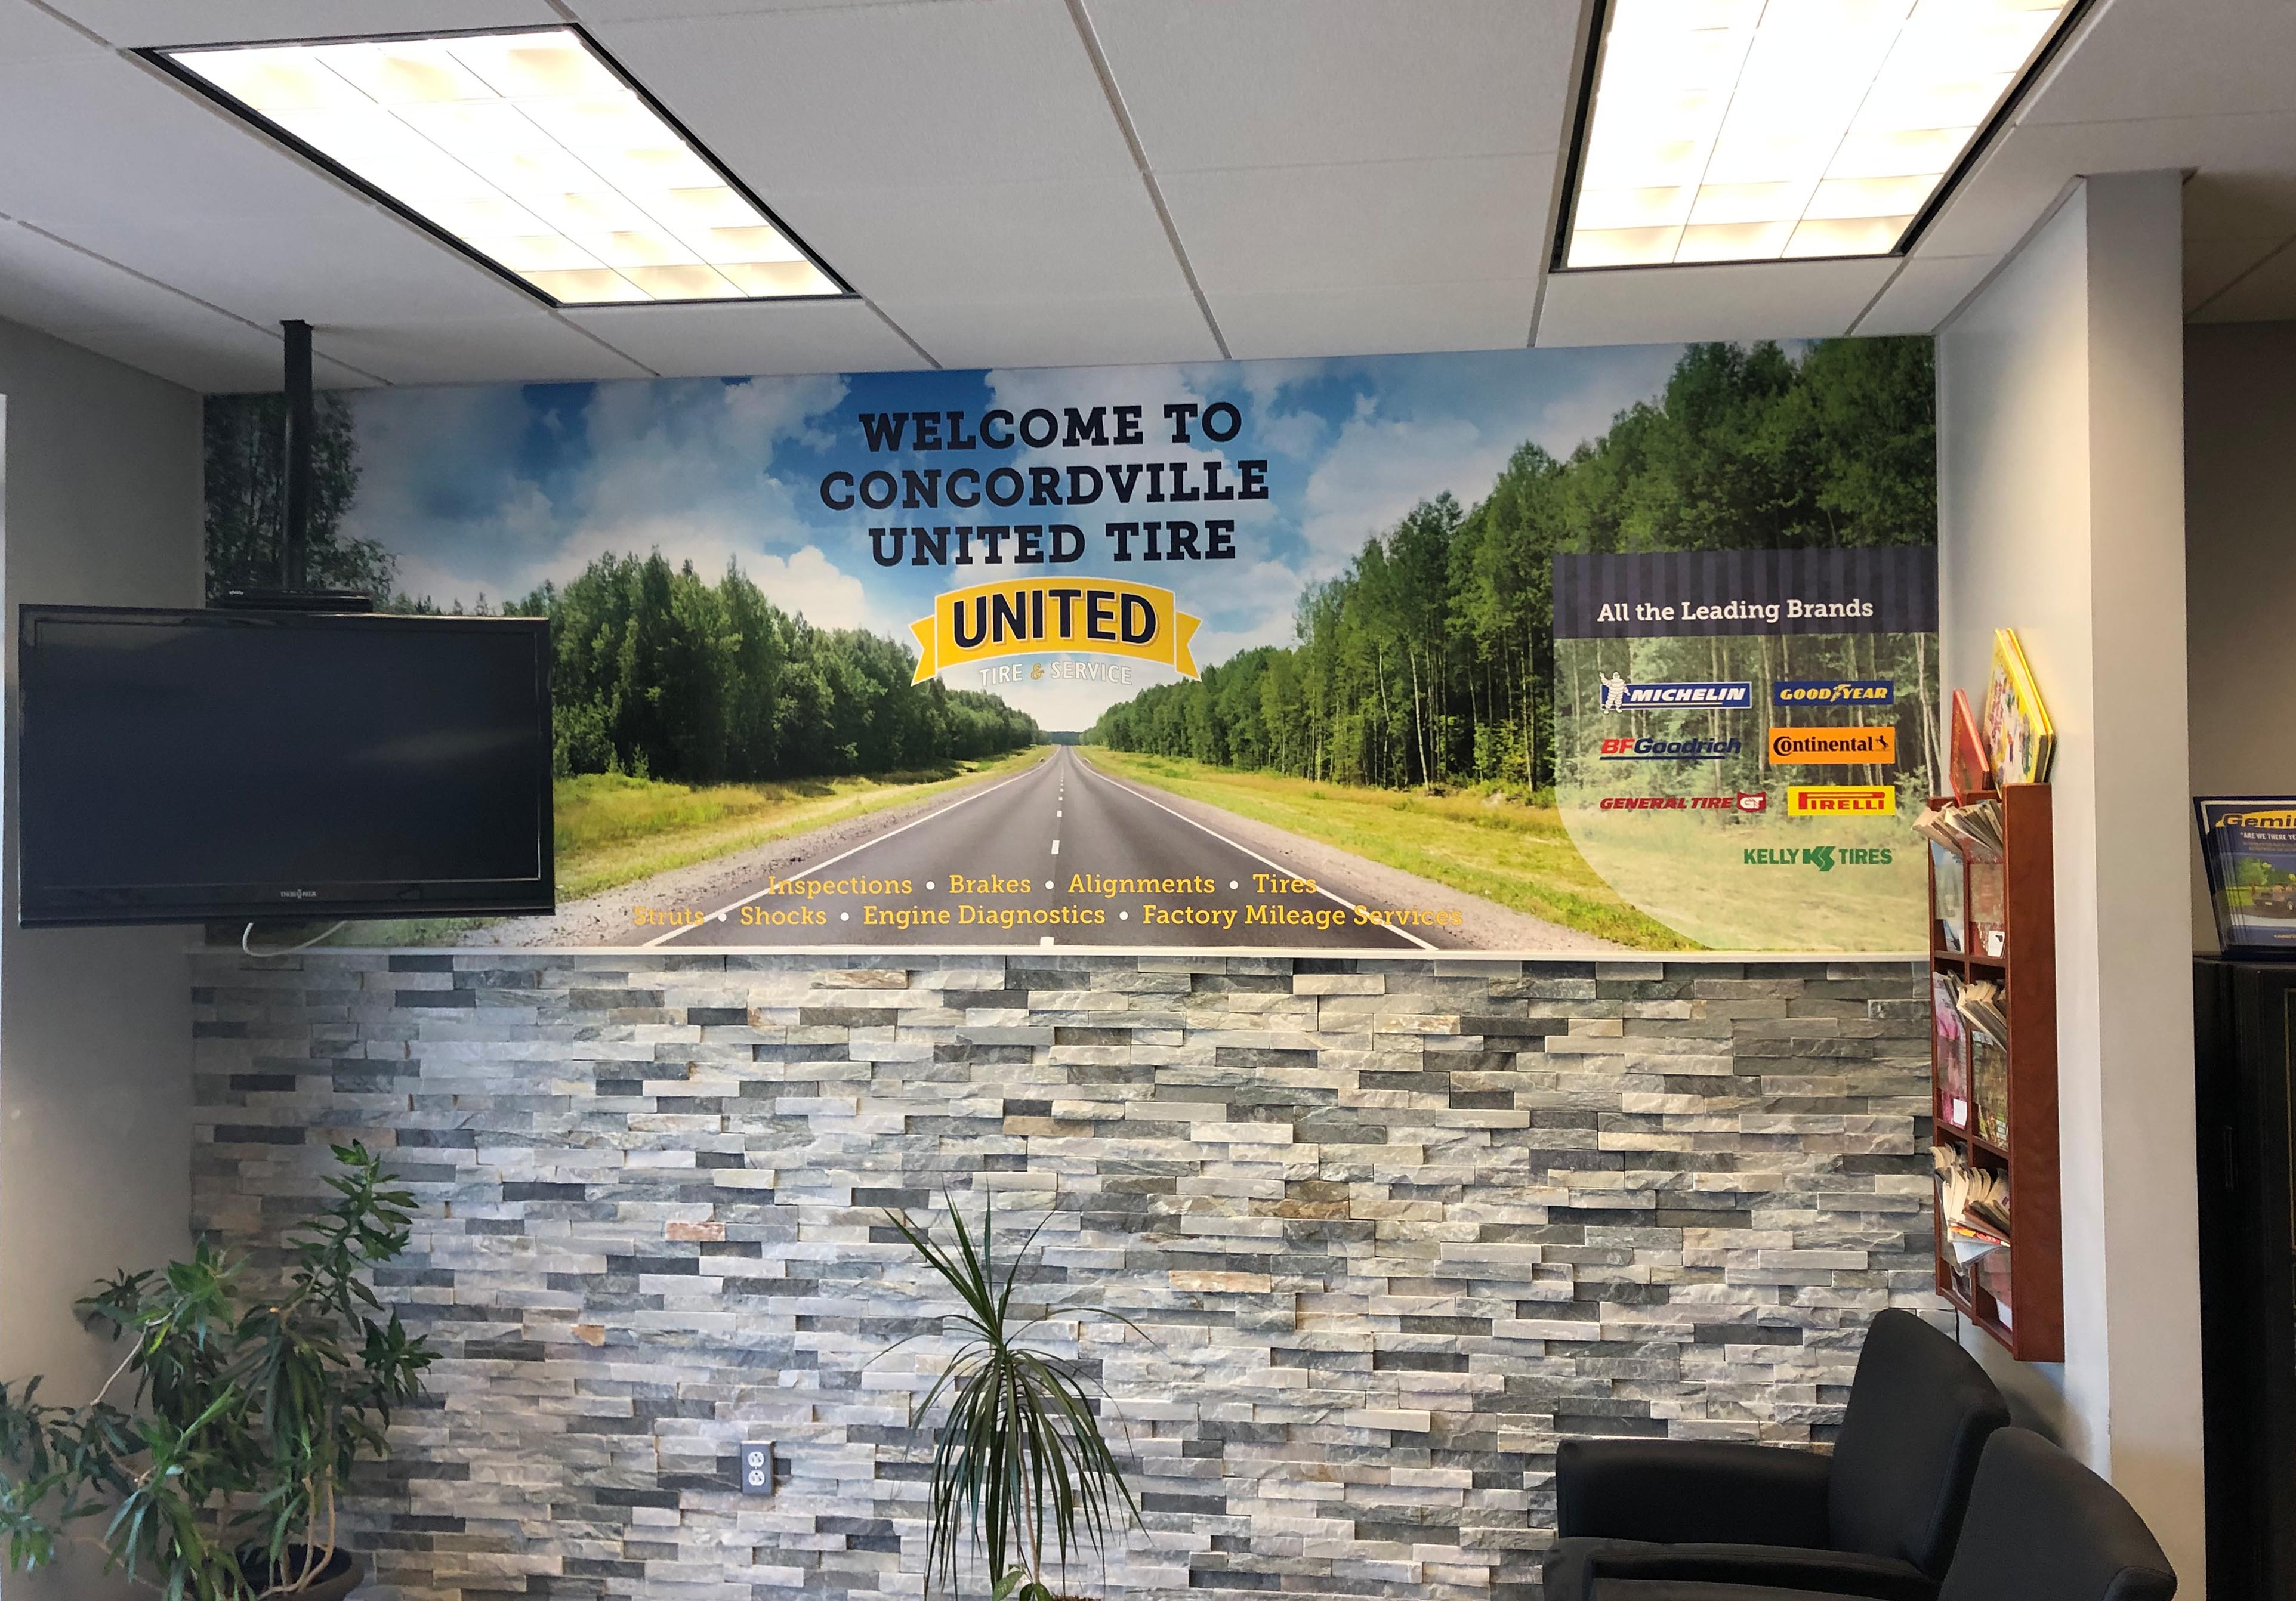 United Tire & Service wall mural